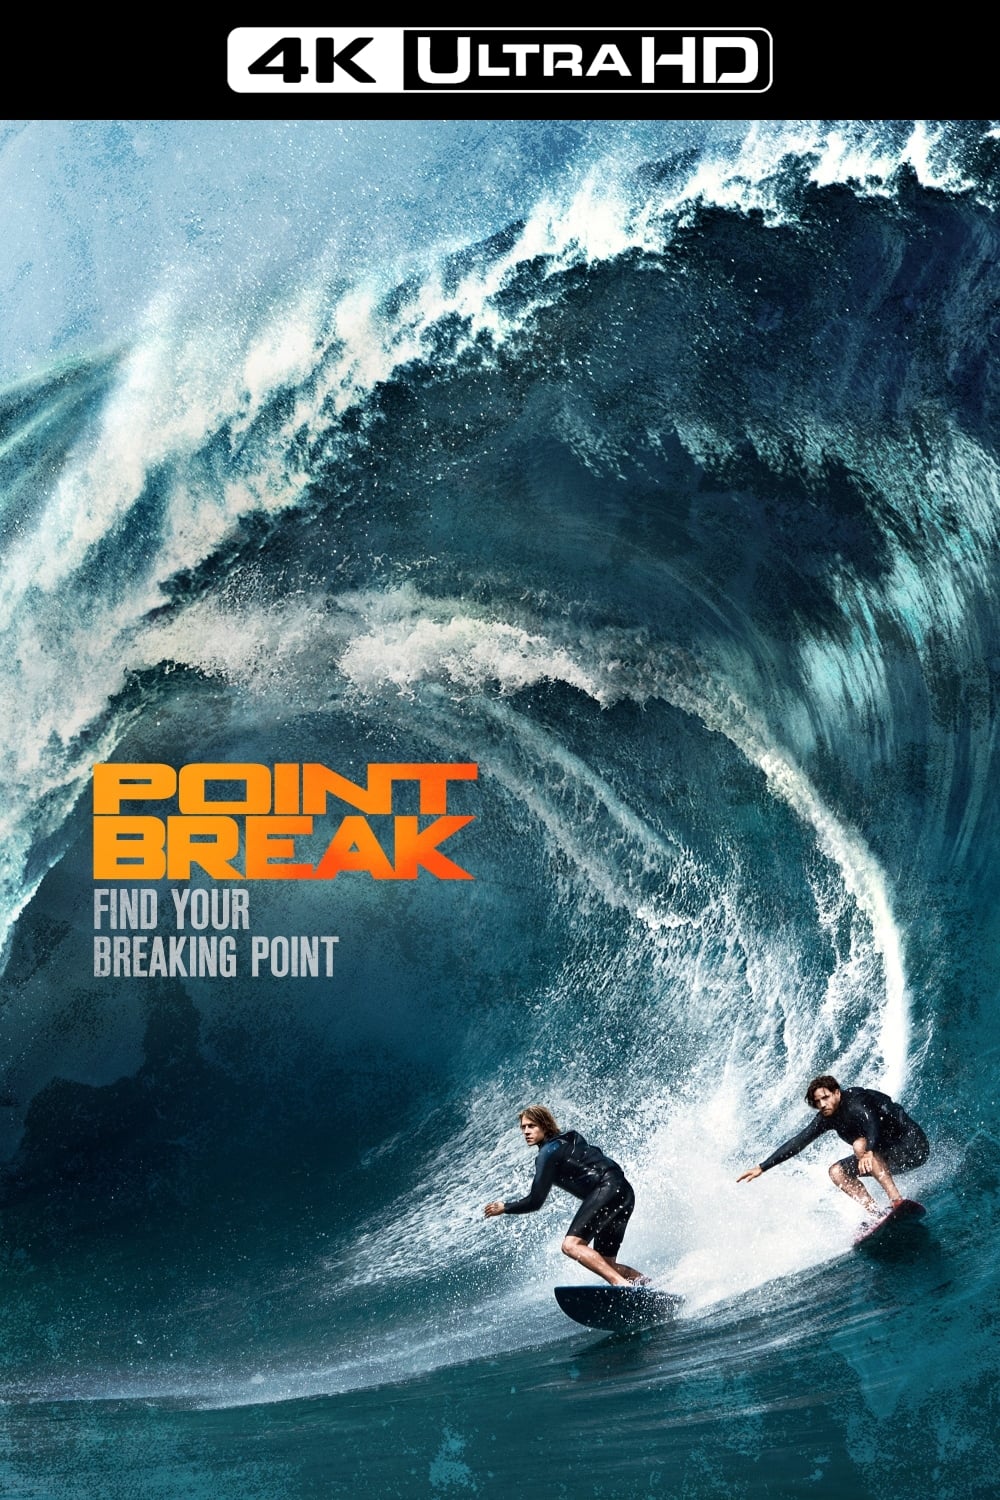 point break 2015 yacht party song